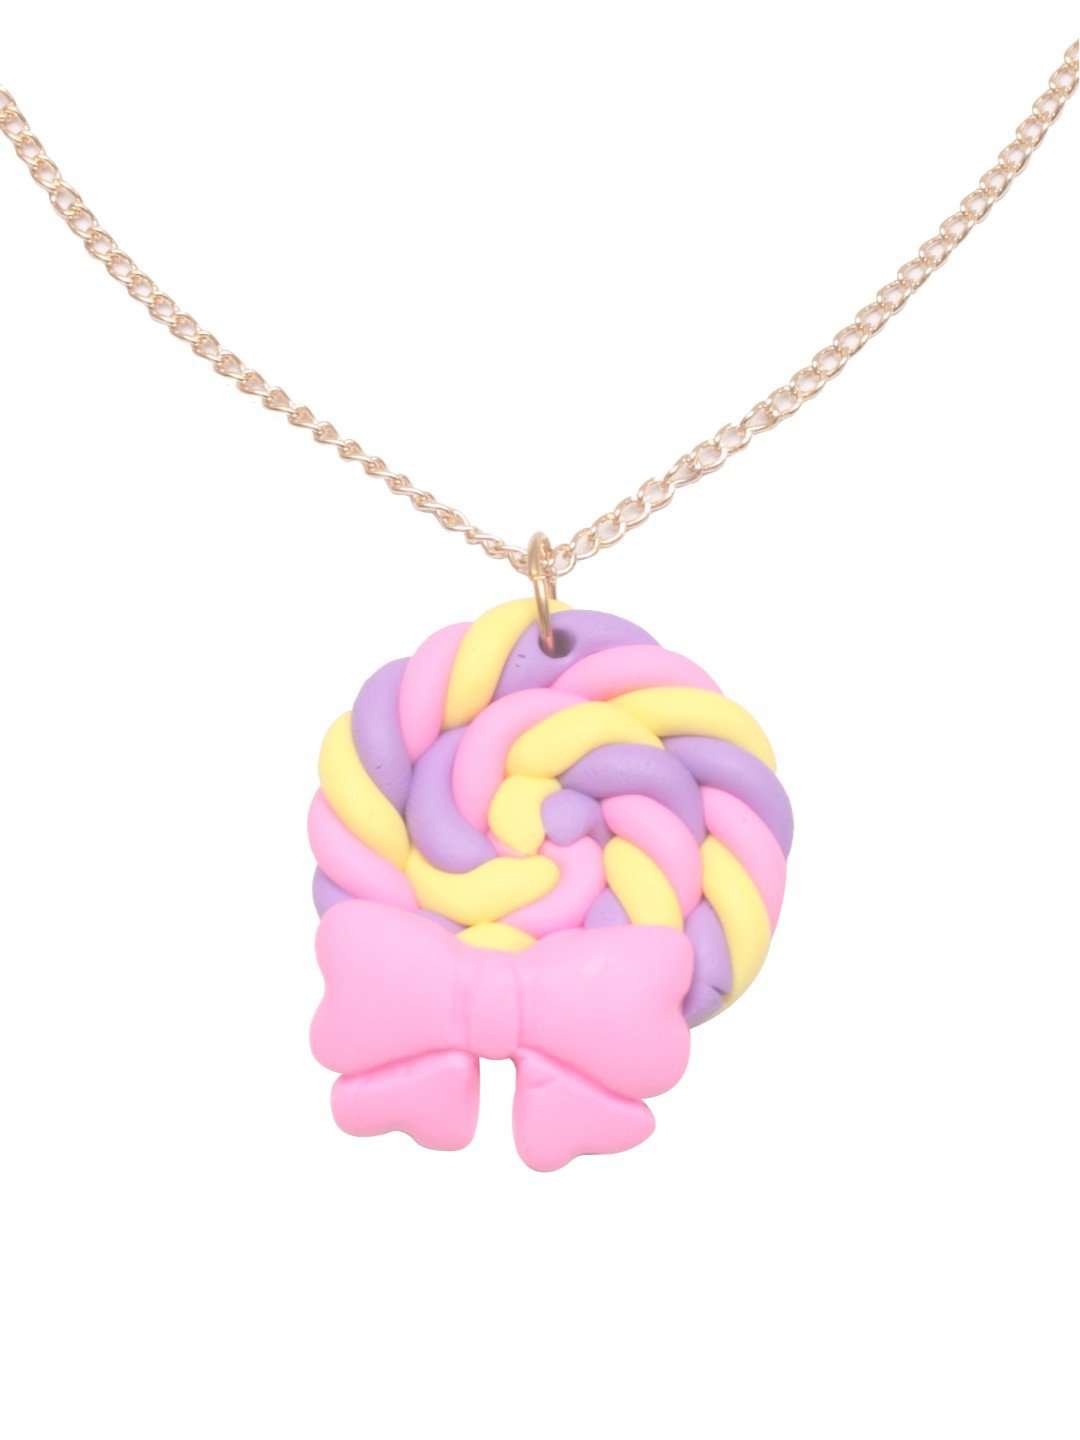 Stol'n Kids Gold Chain Necklace with Candy Pendant :Multi - SWHF